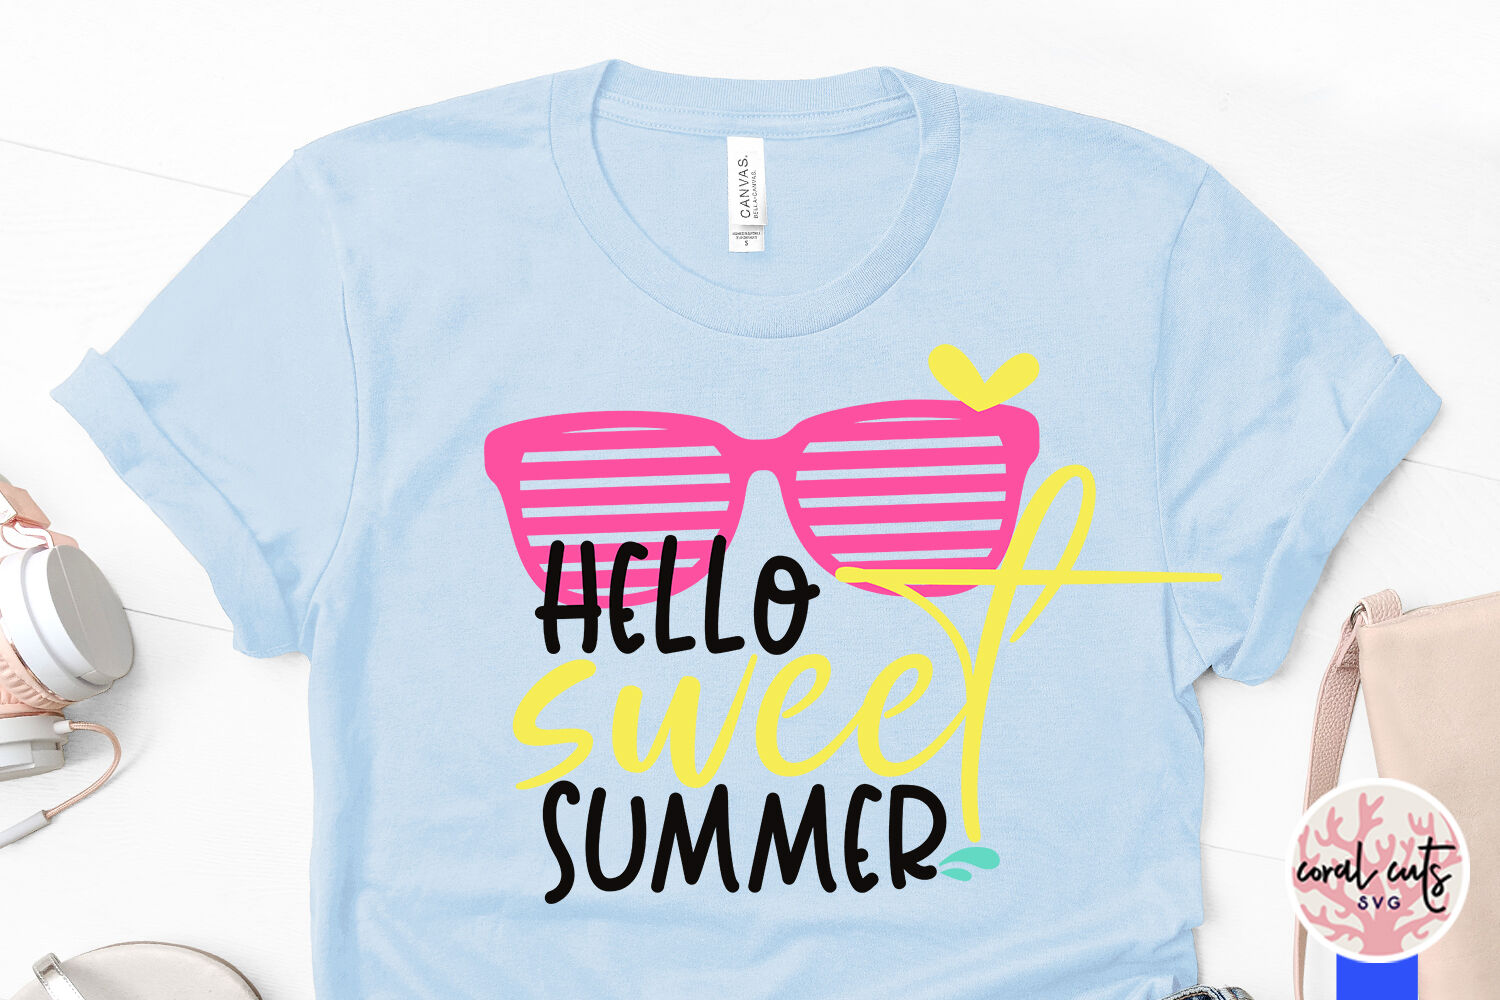 Hello sweet summer - Summer SVG EPS DXF PNG Cut File By ...